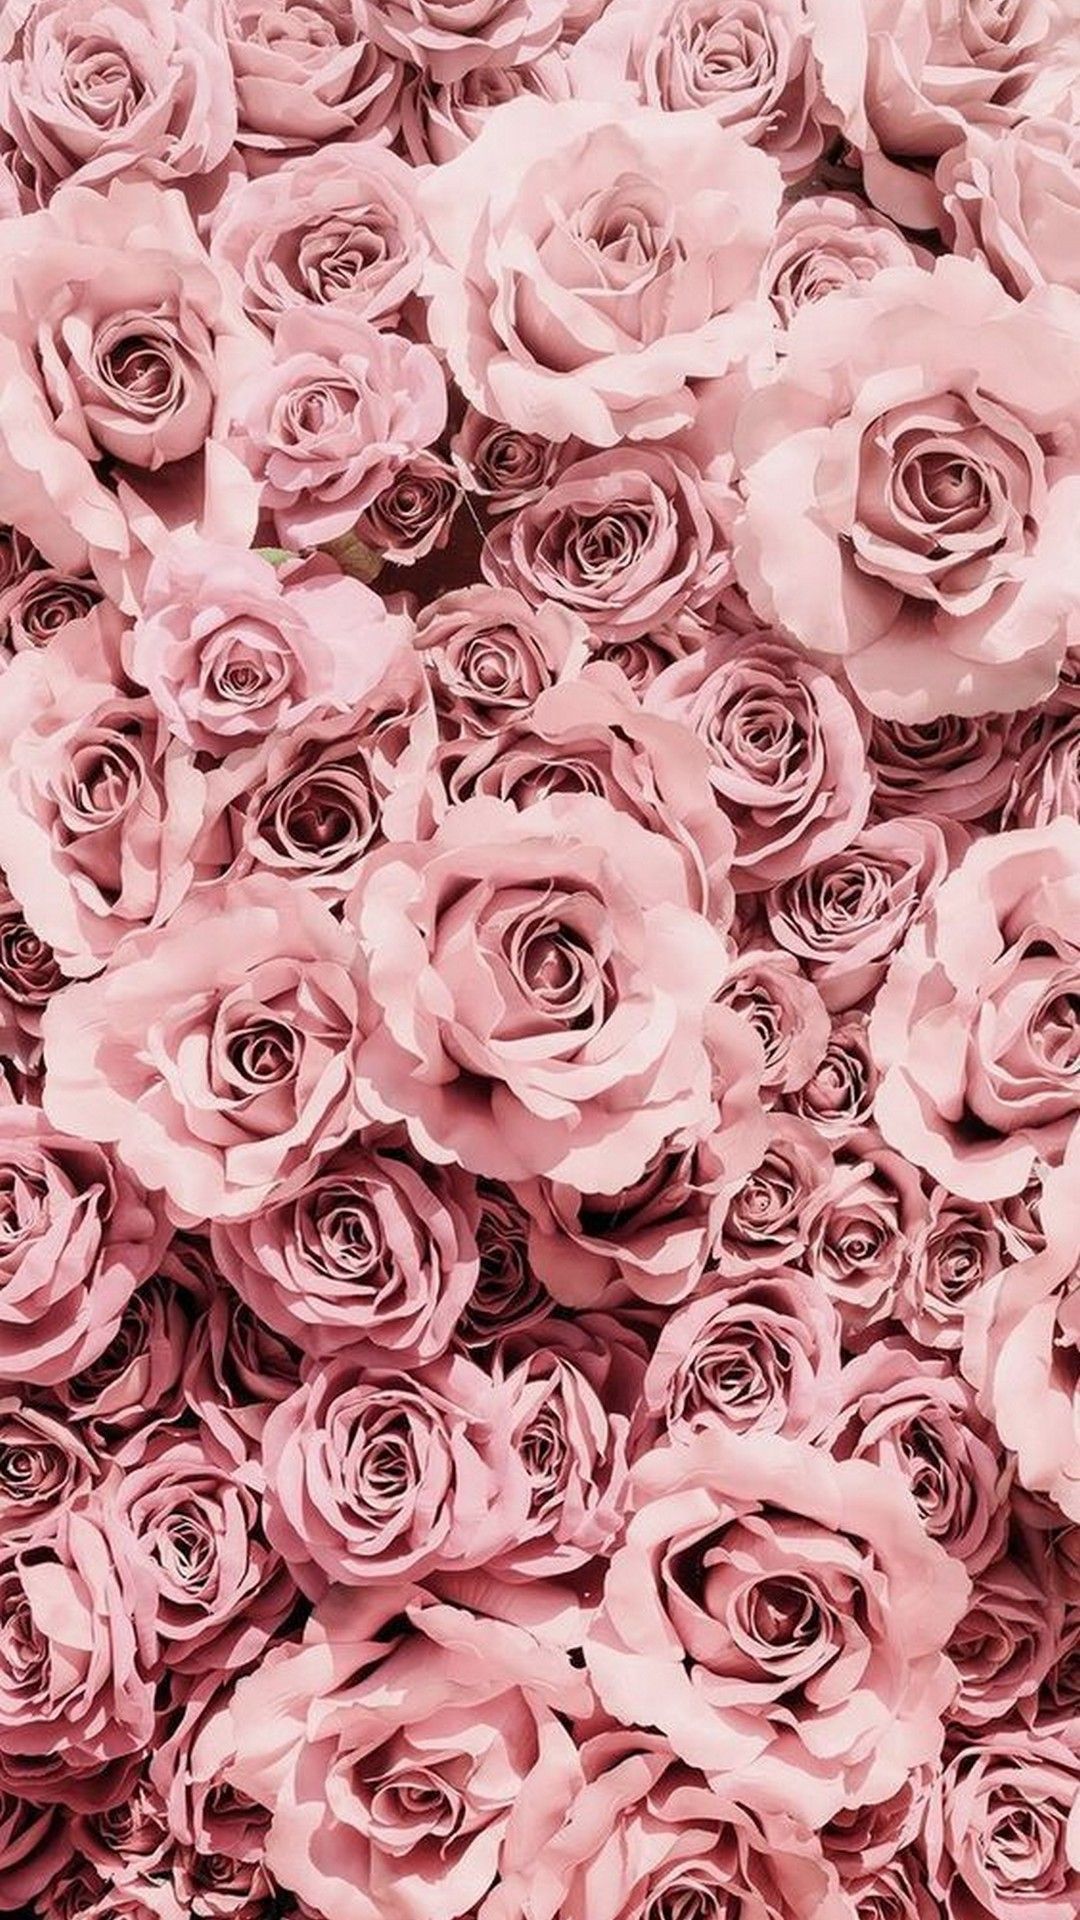 A bunch of pink roses in a bouquet. - Rose gold, Android, roses, garden